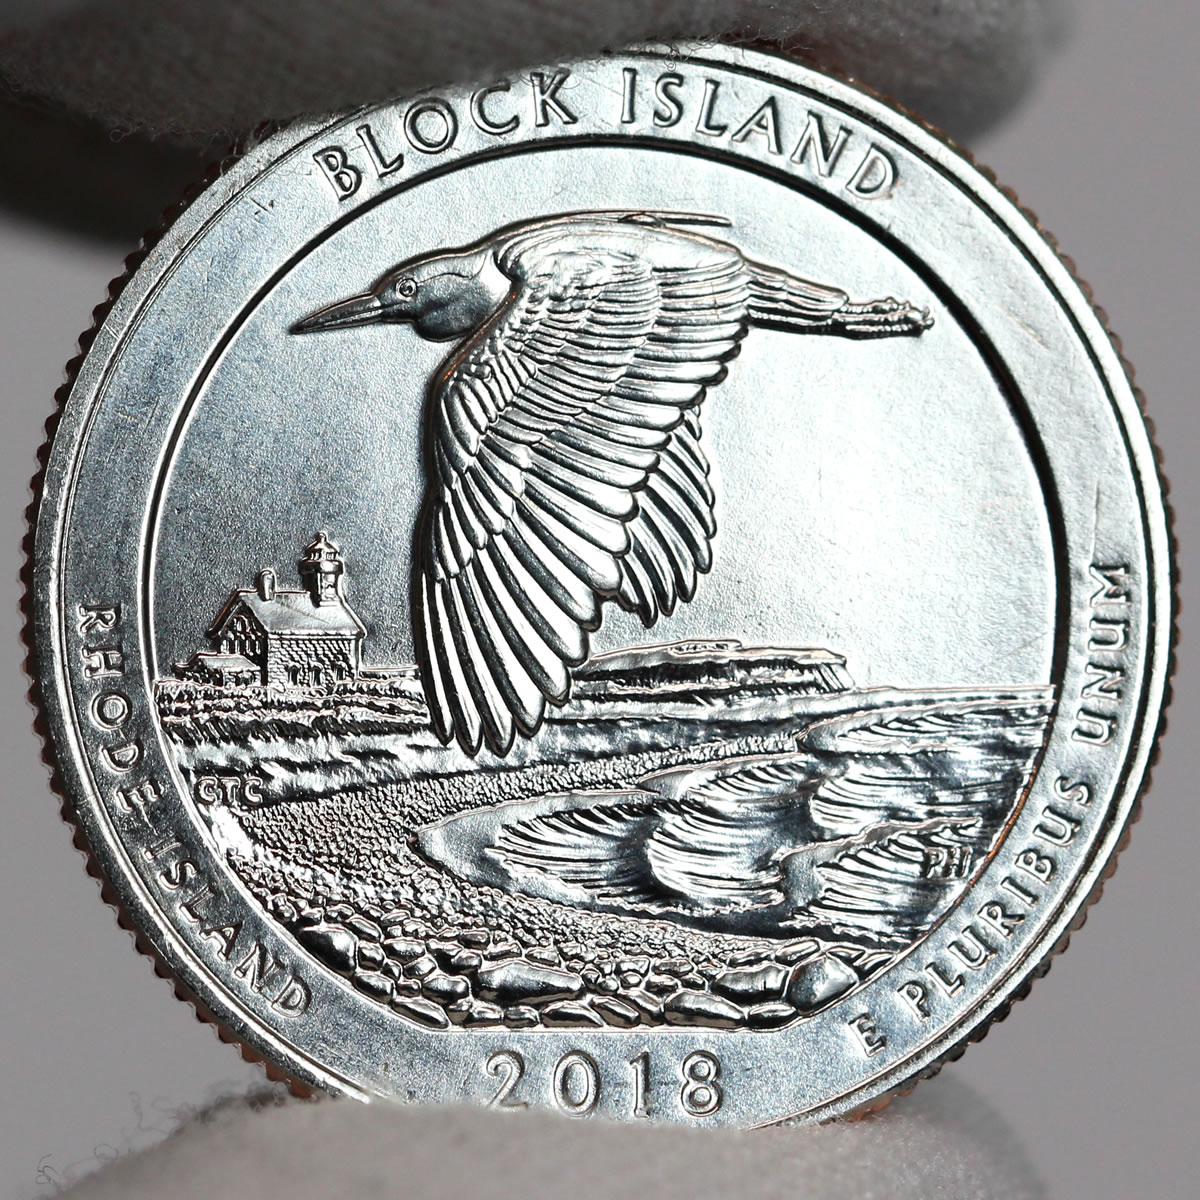 Quarter BU Uncirculated 25 Cent Coin Silver Plated Tie Clip Clasp NEW Rhode Island America the Beautiful US 2018 Block Island National Wildlife Refuge 